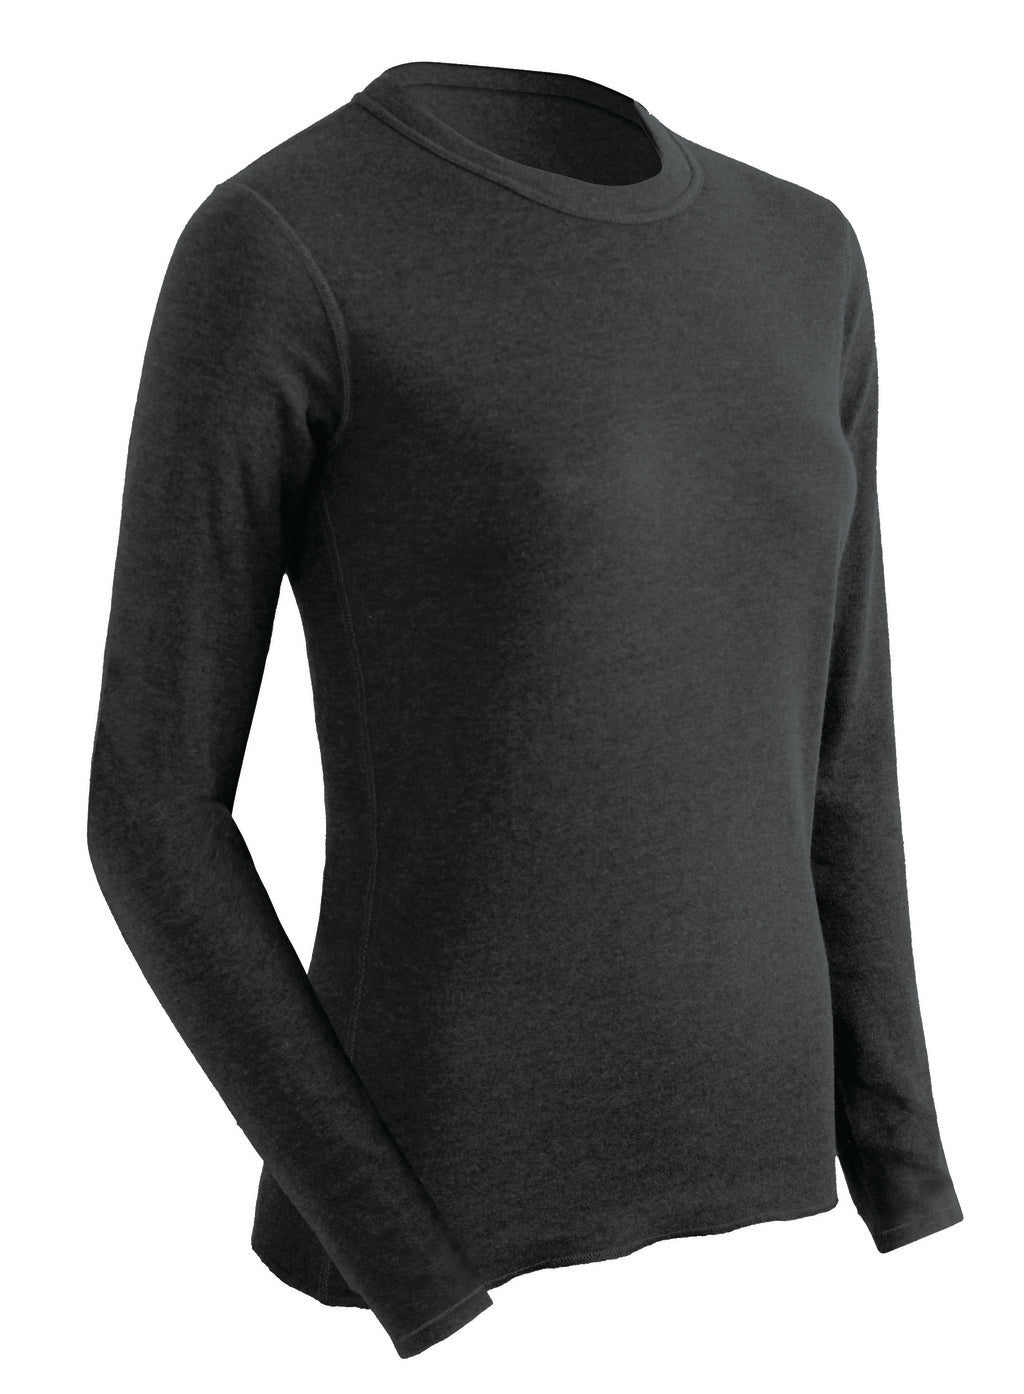 ColdPruf Enthusiast Women's Crew Base Layer Top